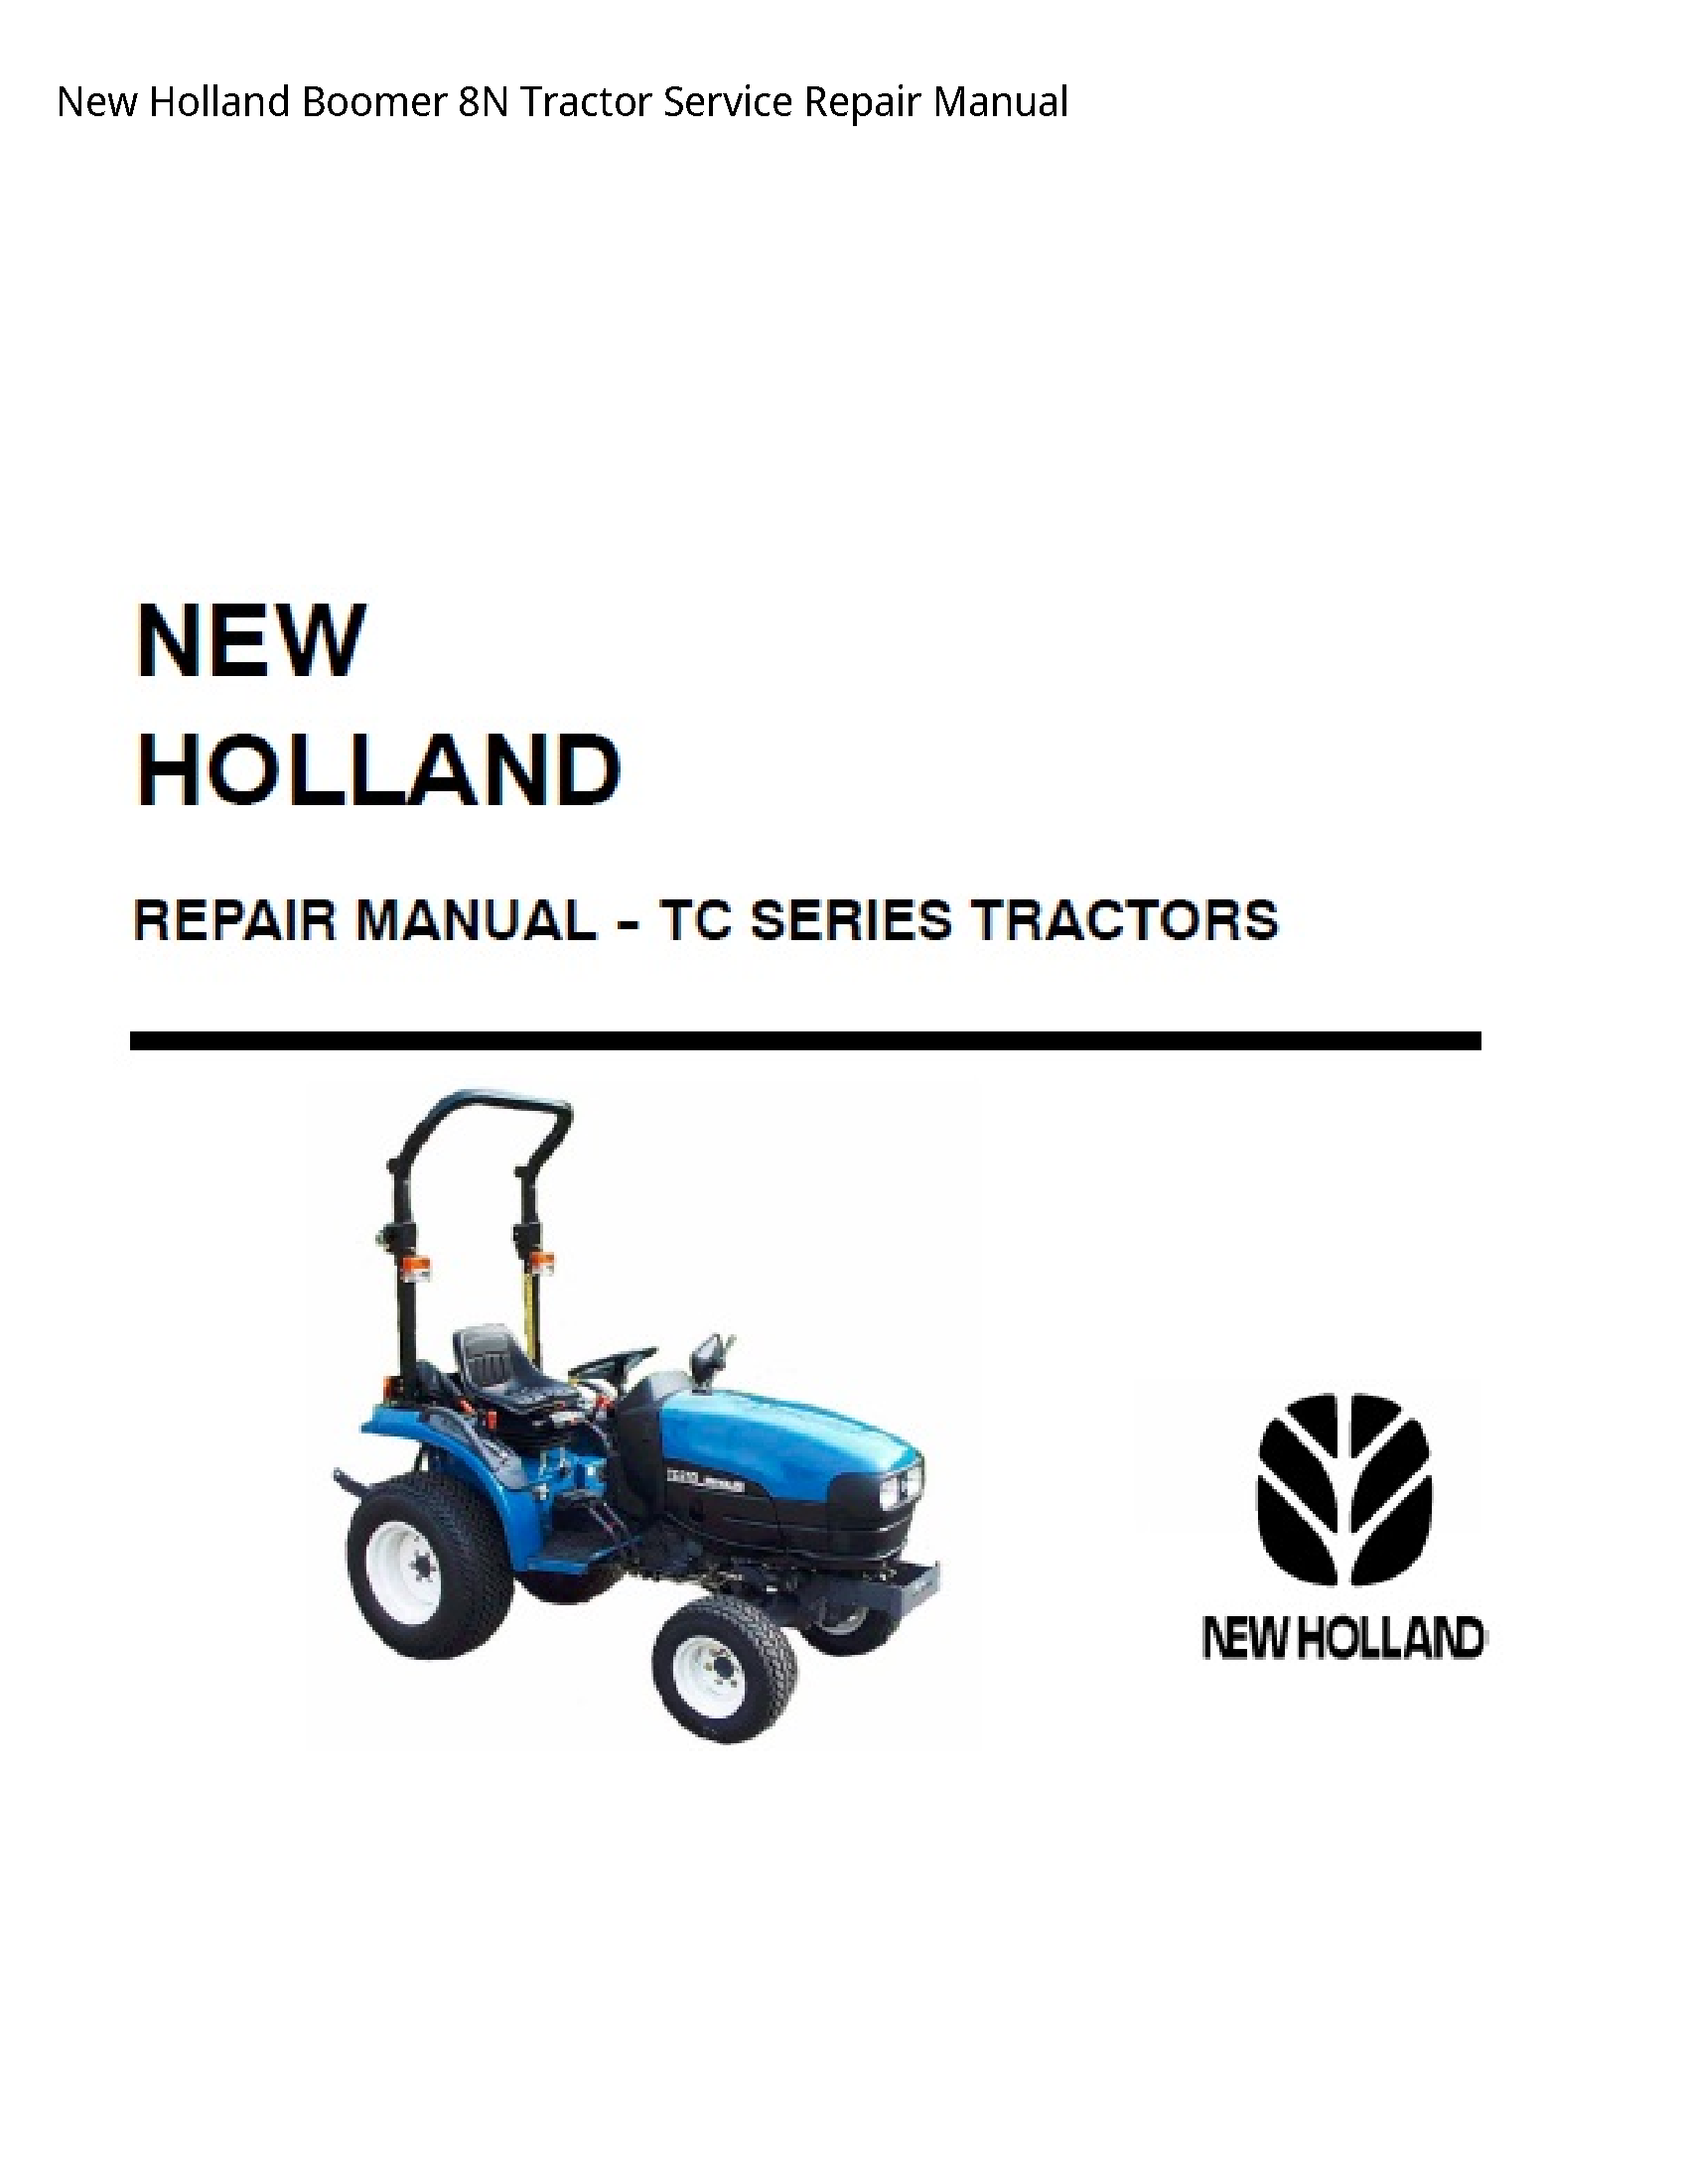 New Holland 8N Boomer Tractor manual